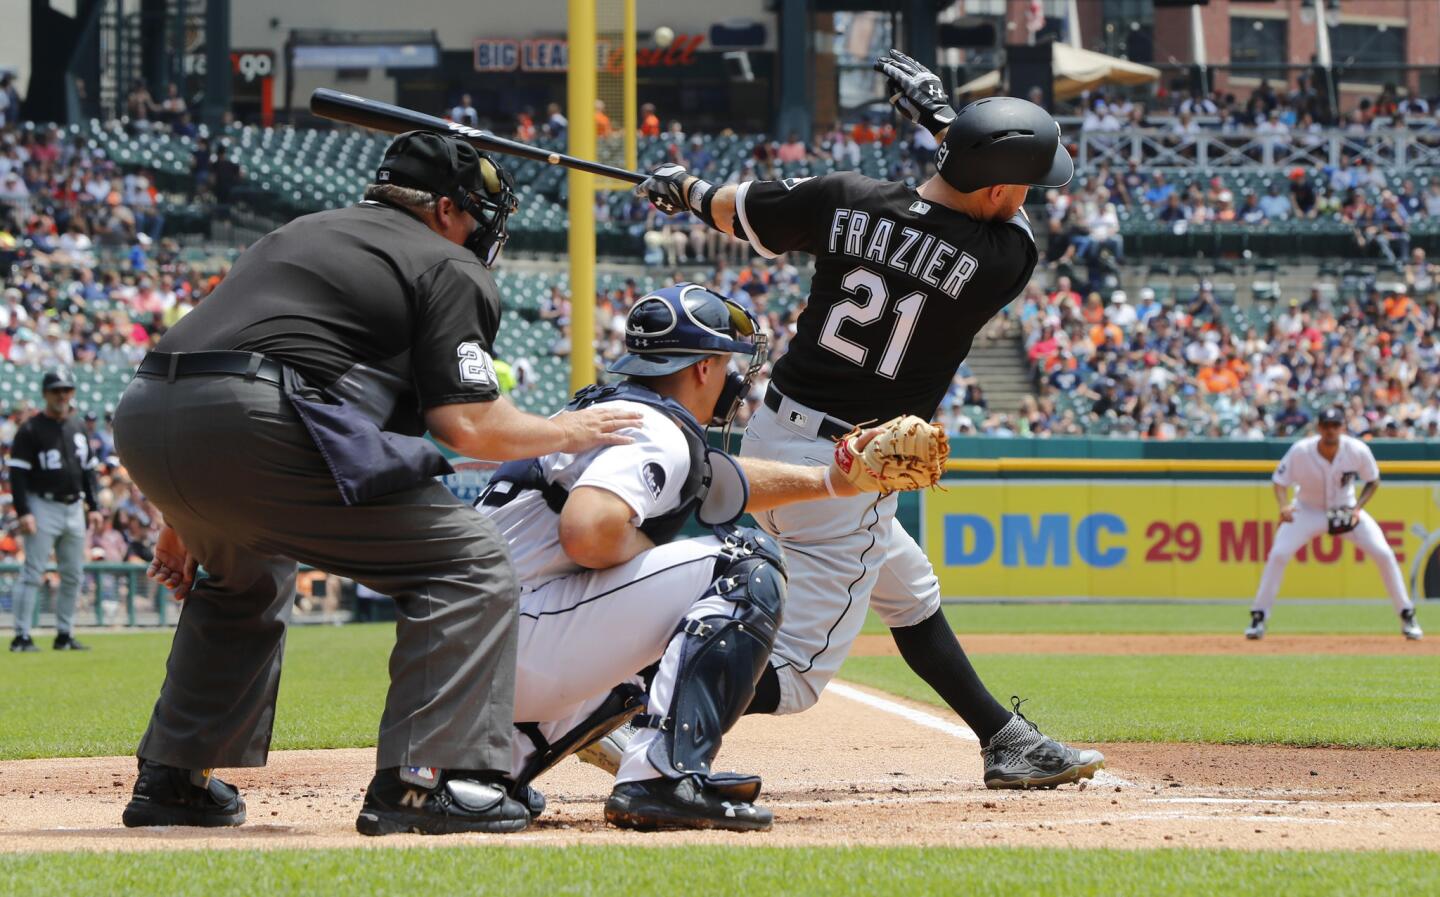 Tigers 7, White Sox 4